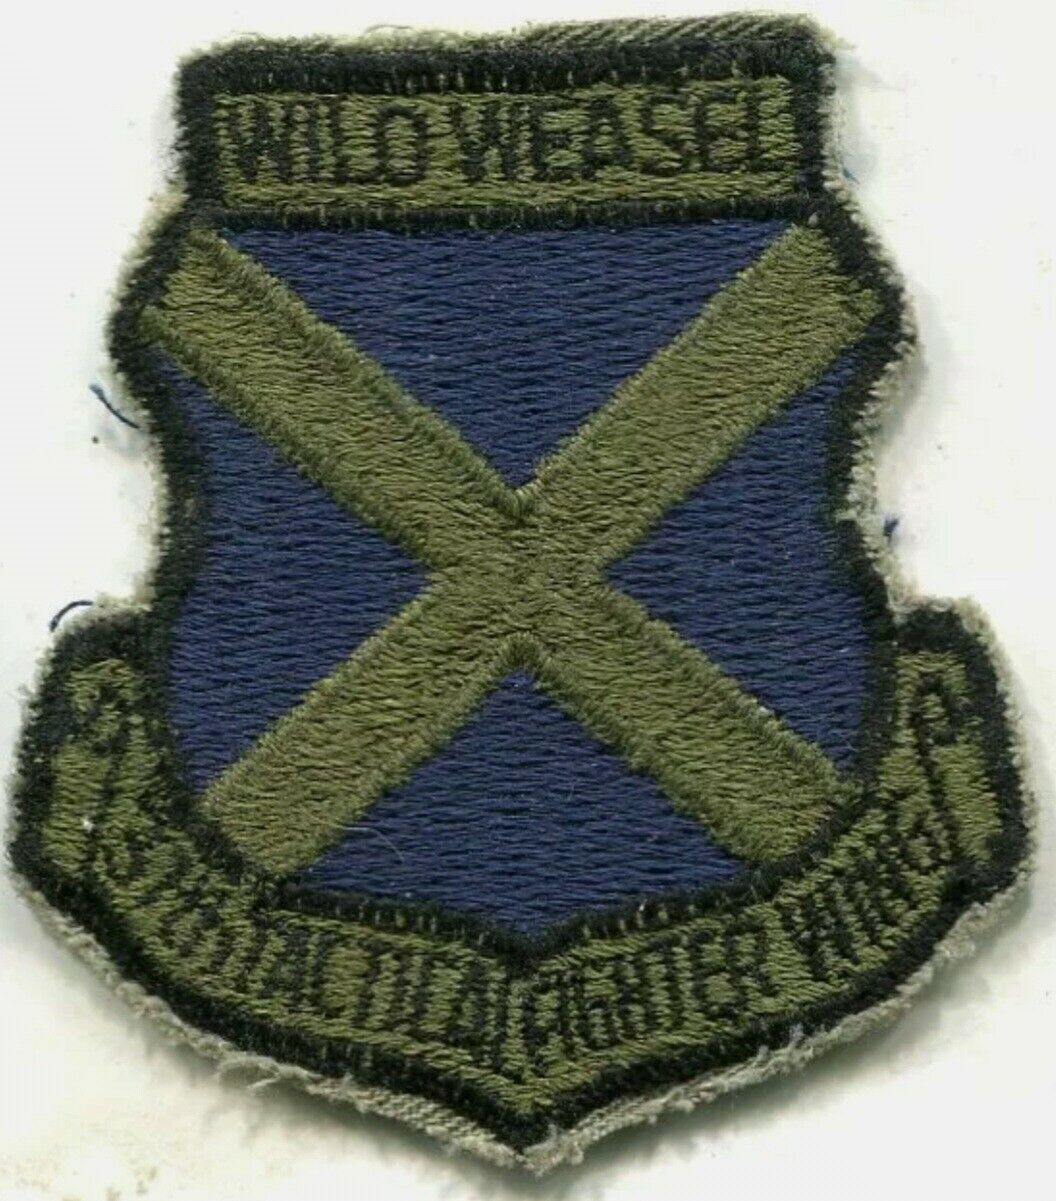 USAF AIR FORCE 37th TACTICAL FIGHTER WING WILD WEASEL PATCH subdued Vintage ORG